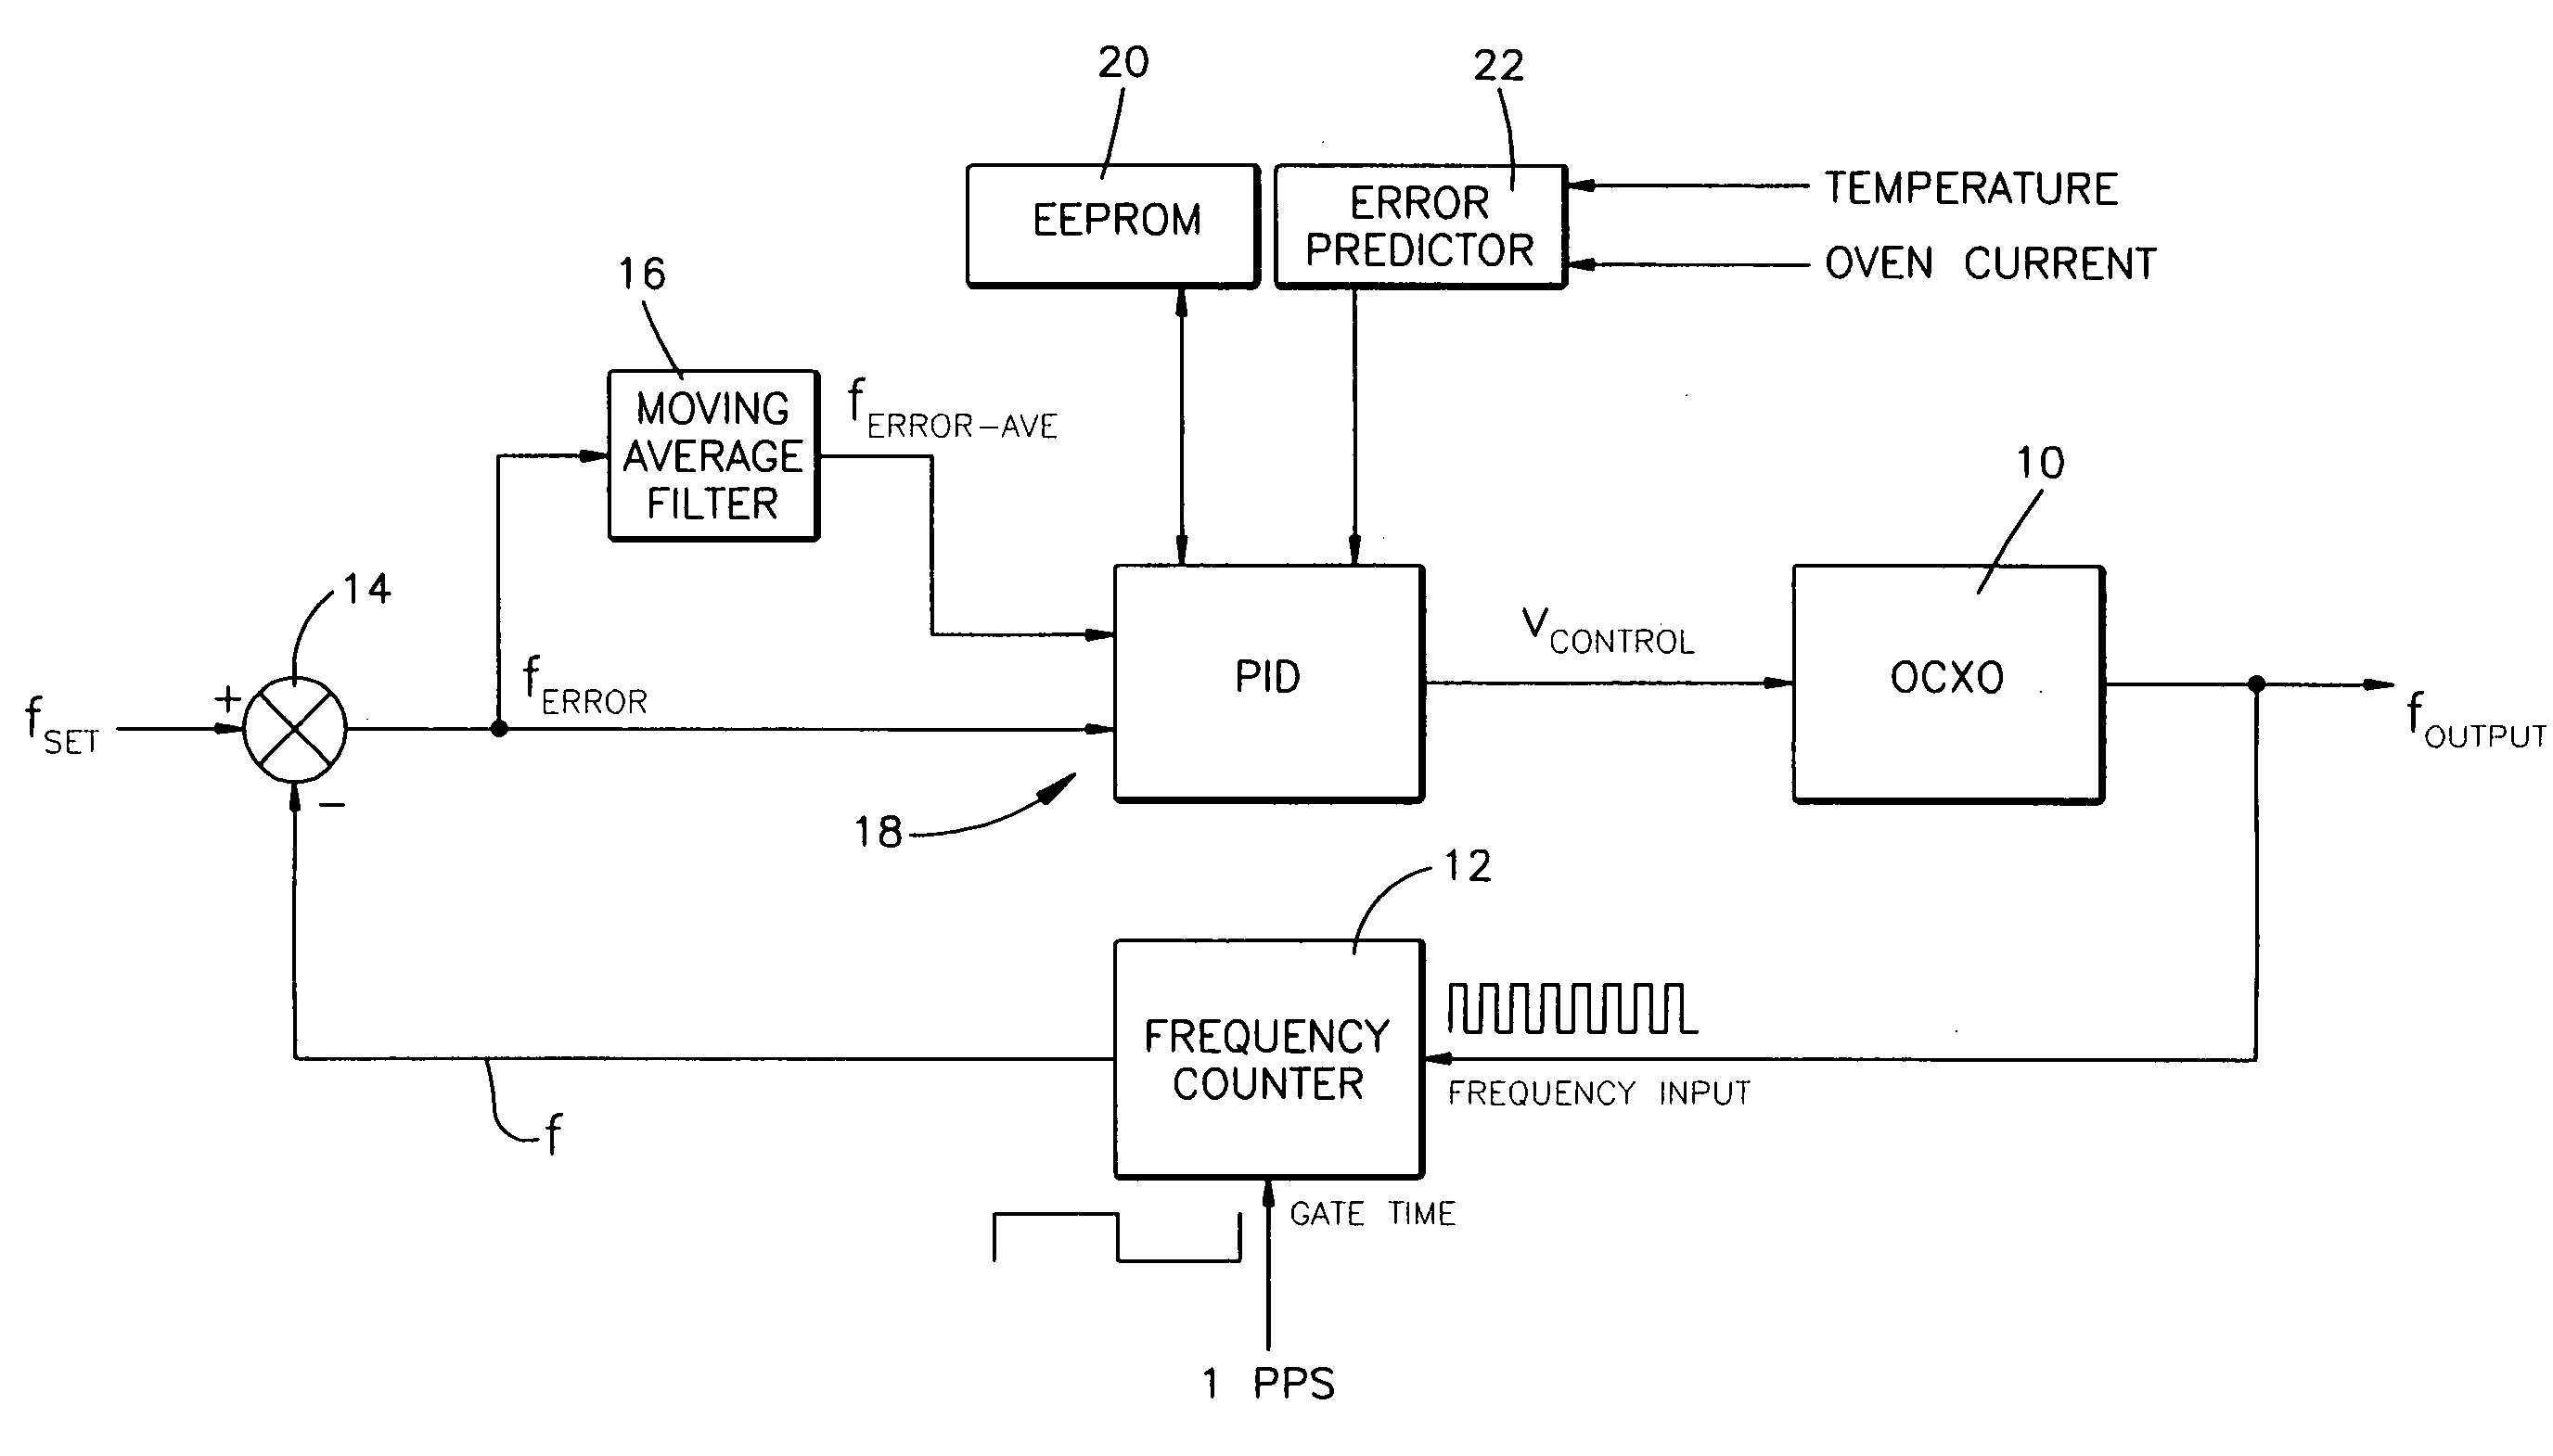 Phase lock control system for a voltage controlled oscillator